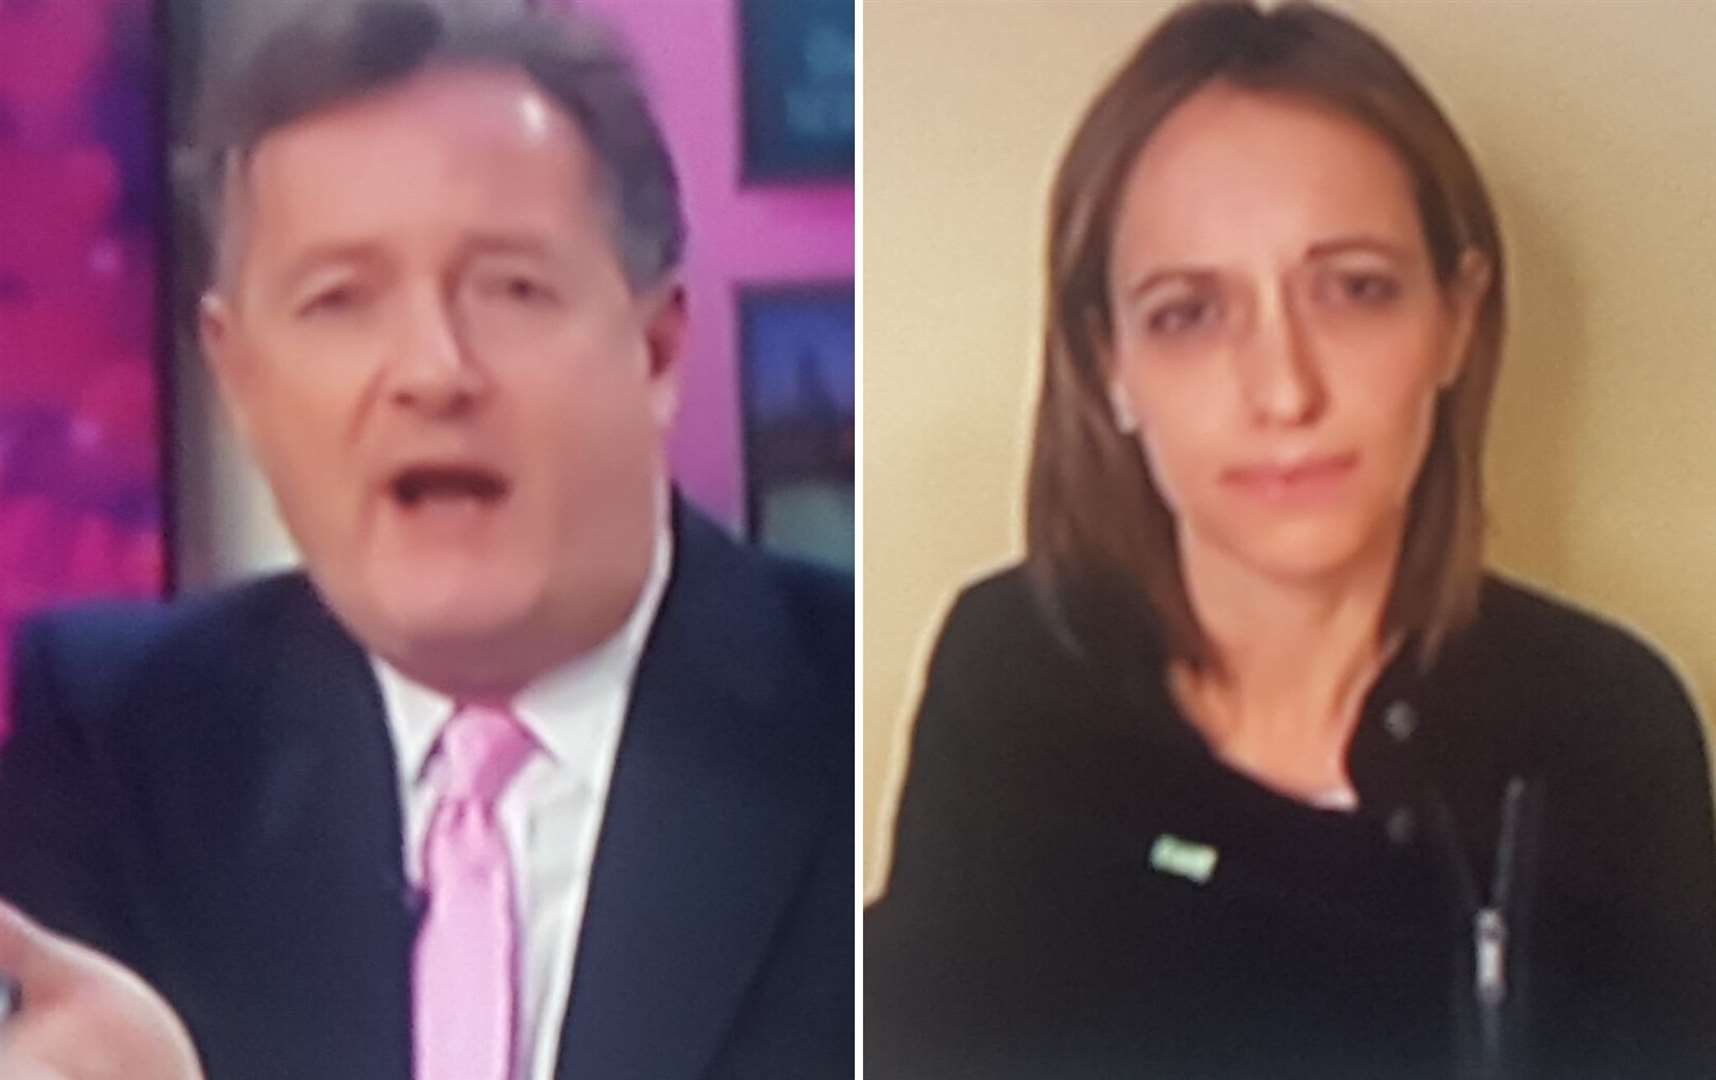 Piers Morgan clashed with Faversham MP Helen Whately once again on GMB